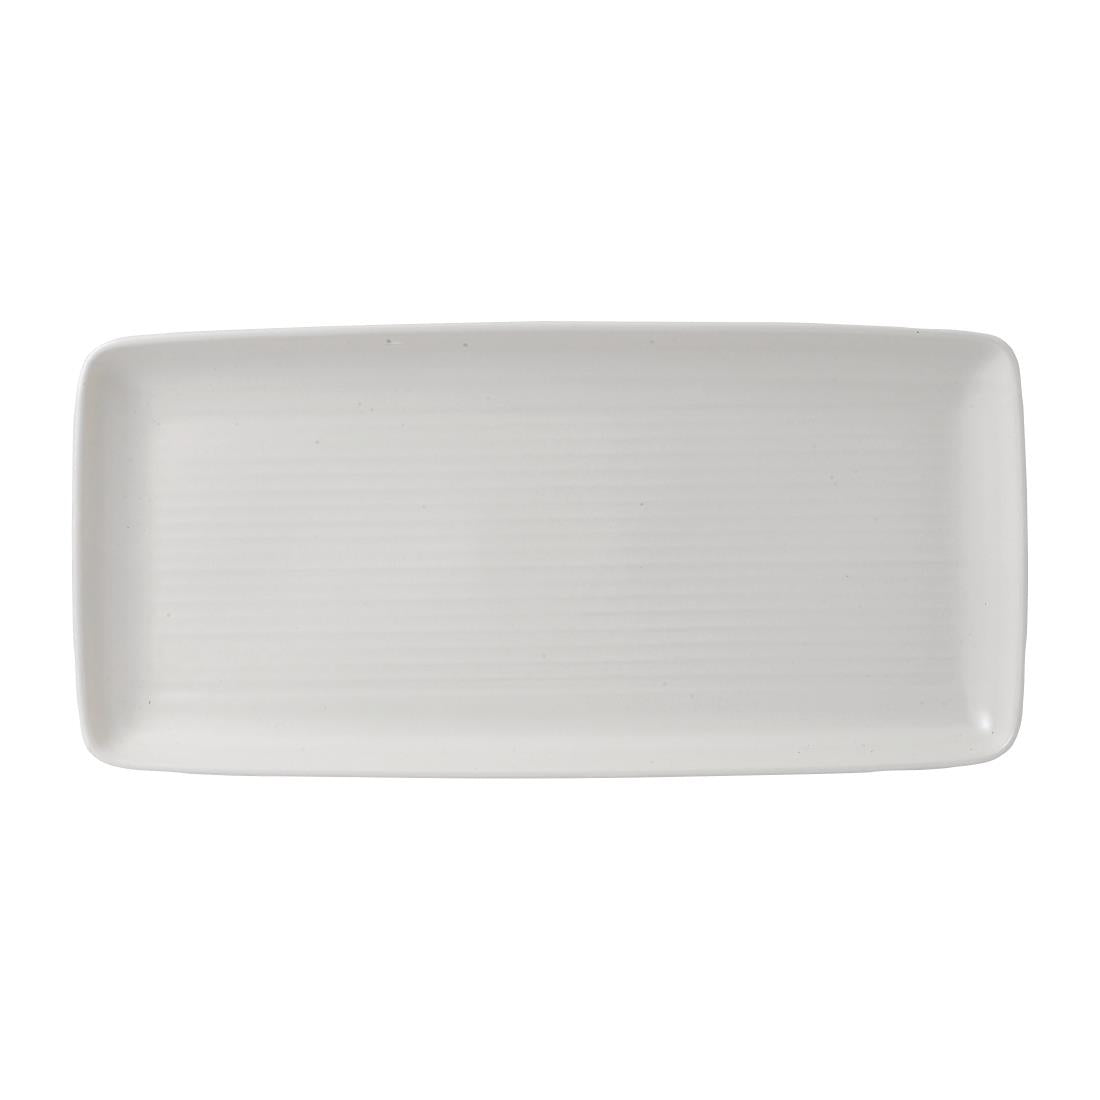 FE344 Dudson Evo Pearl Rectangular Tray 359 x 168mm (Pack of 4) JD Catering Equipment Solutions Ltd